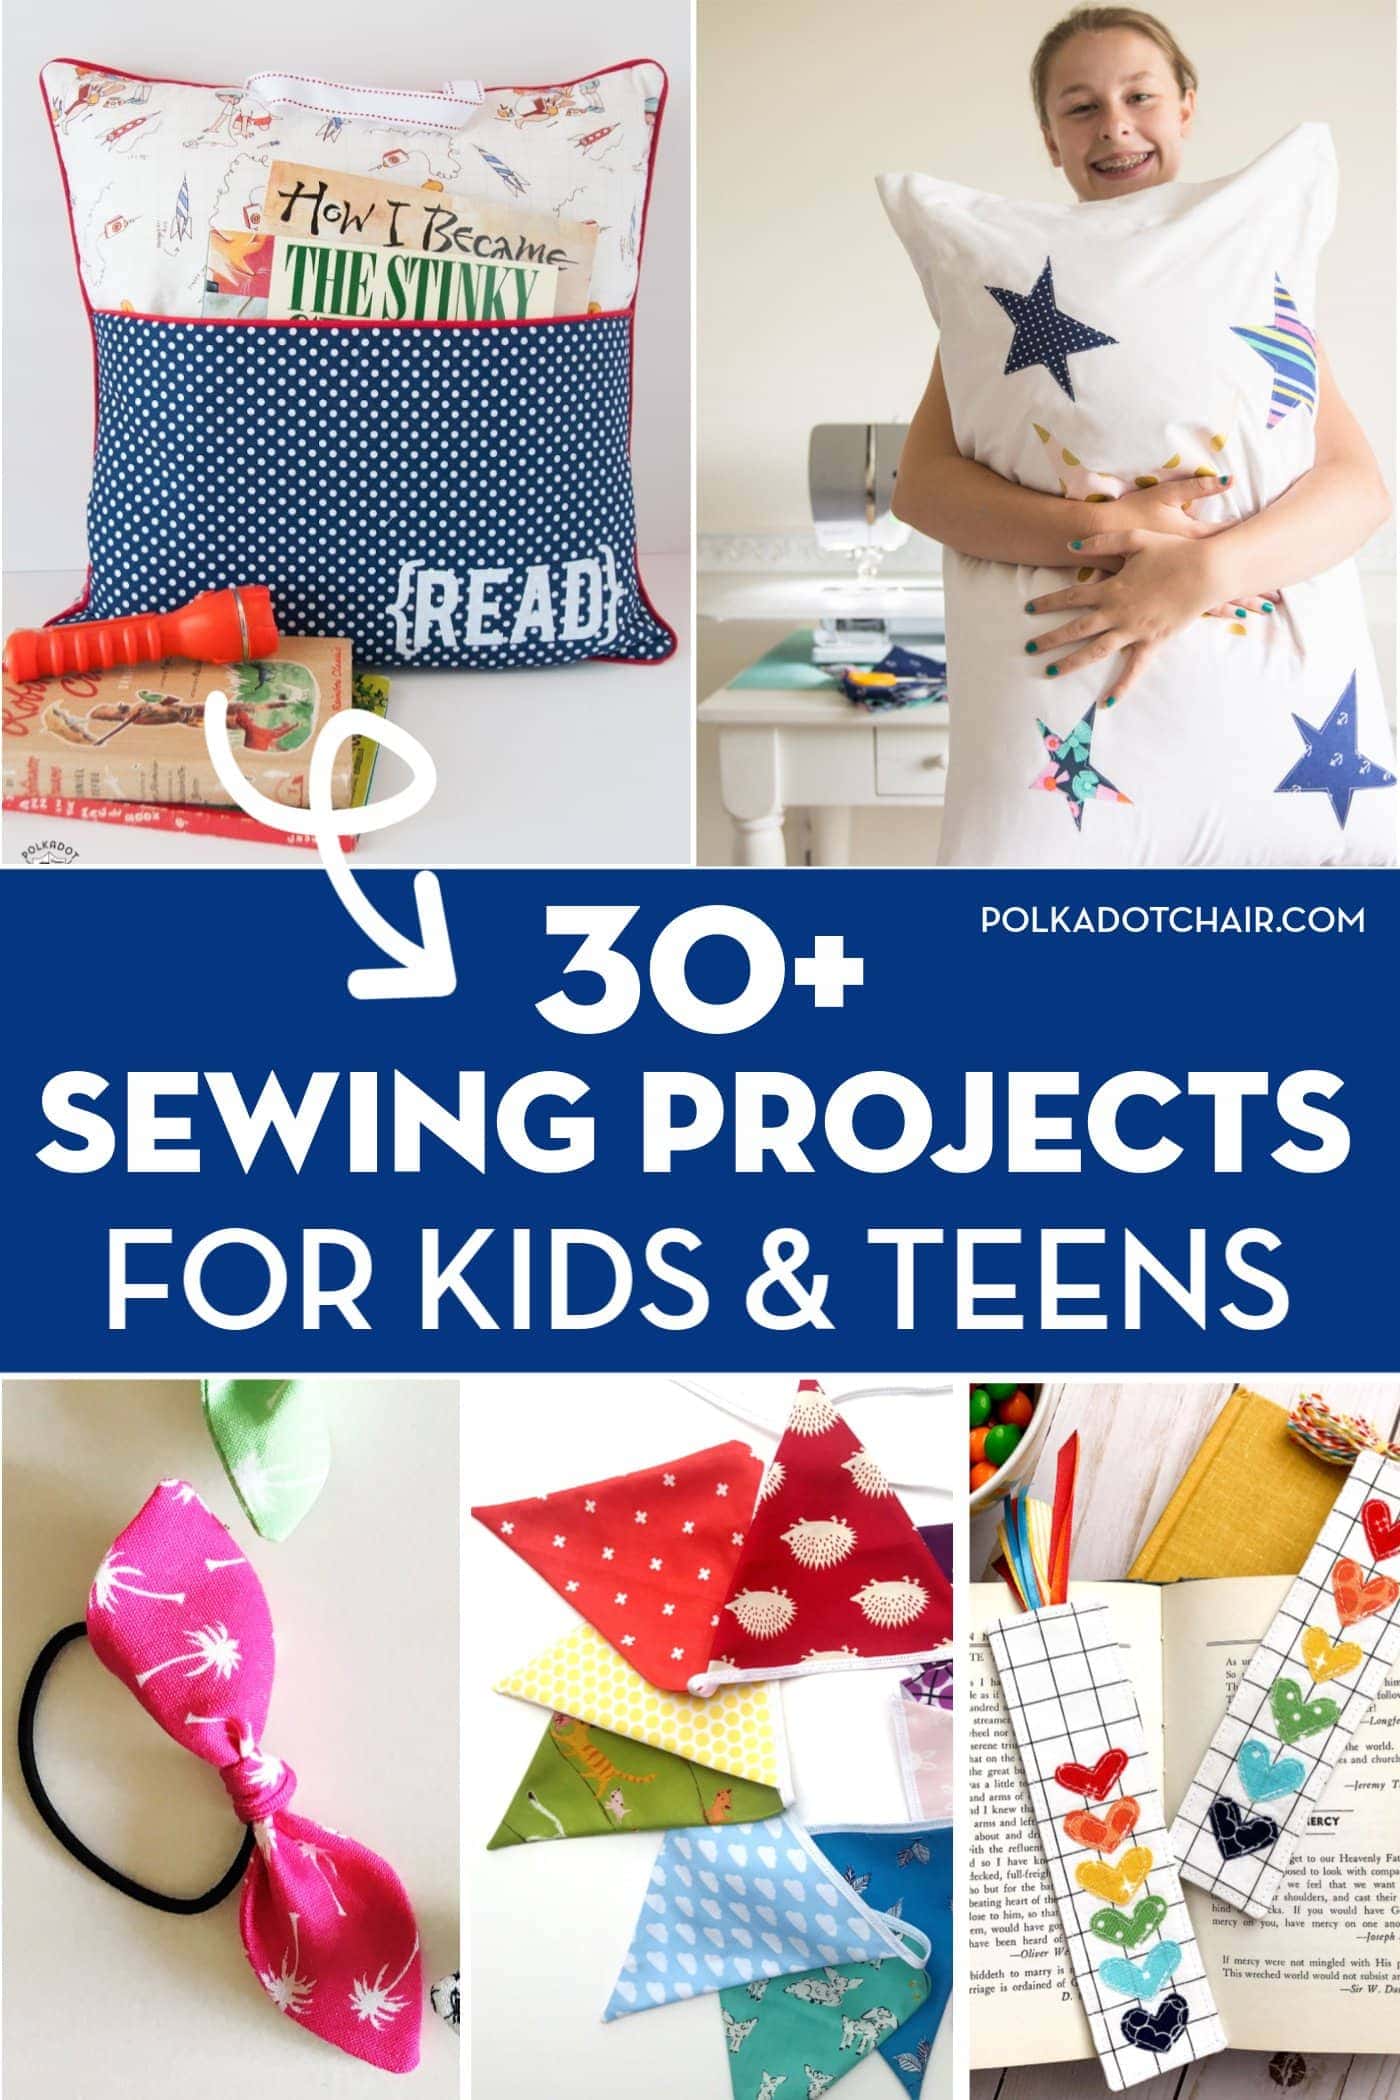 Offcut Projects: Sewing Clothes With Just 1 Metre - The